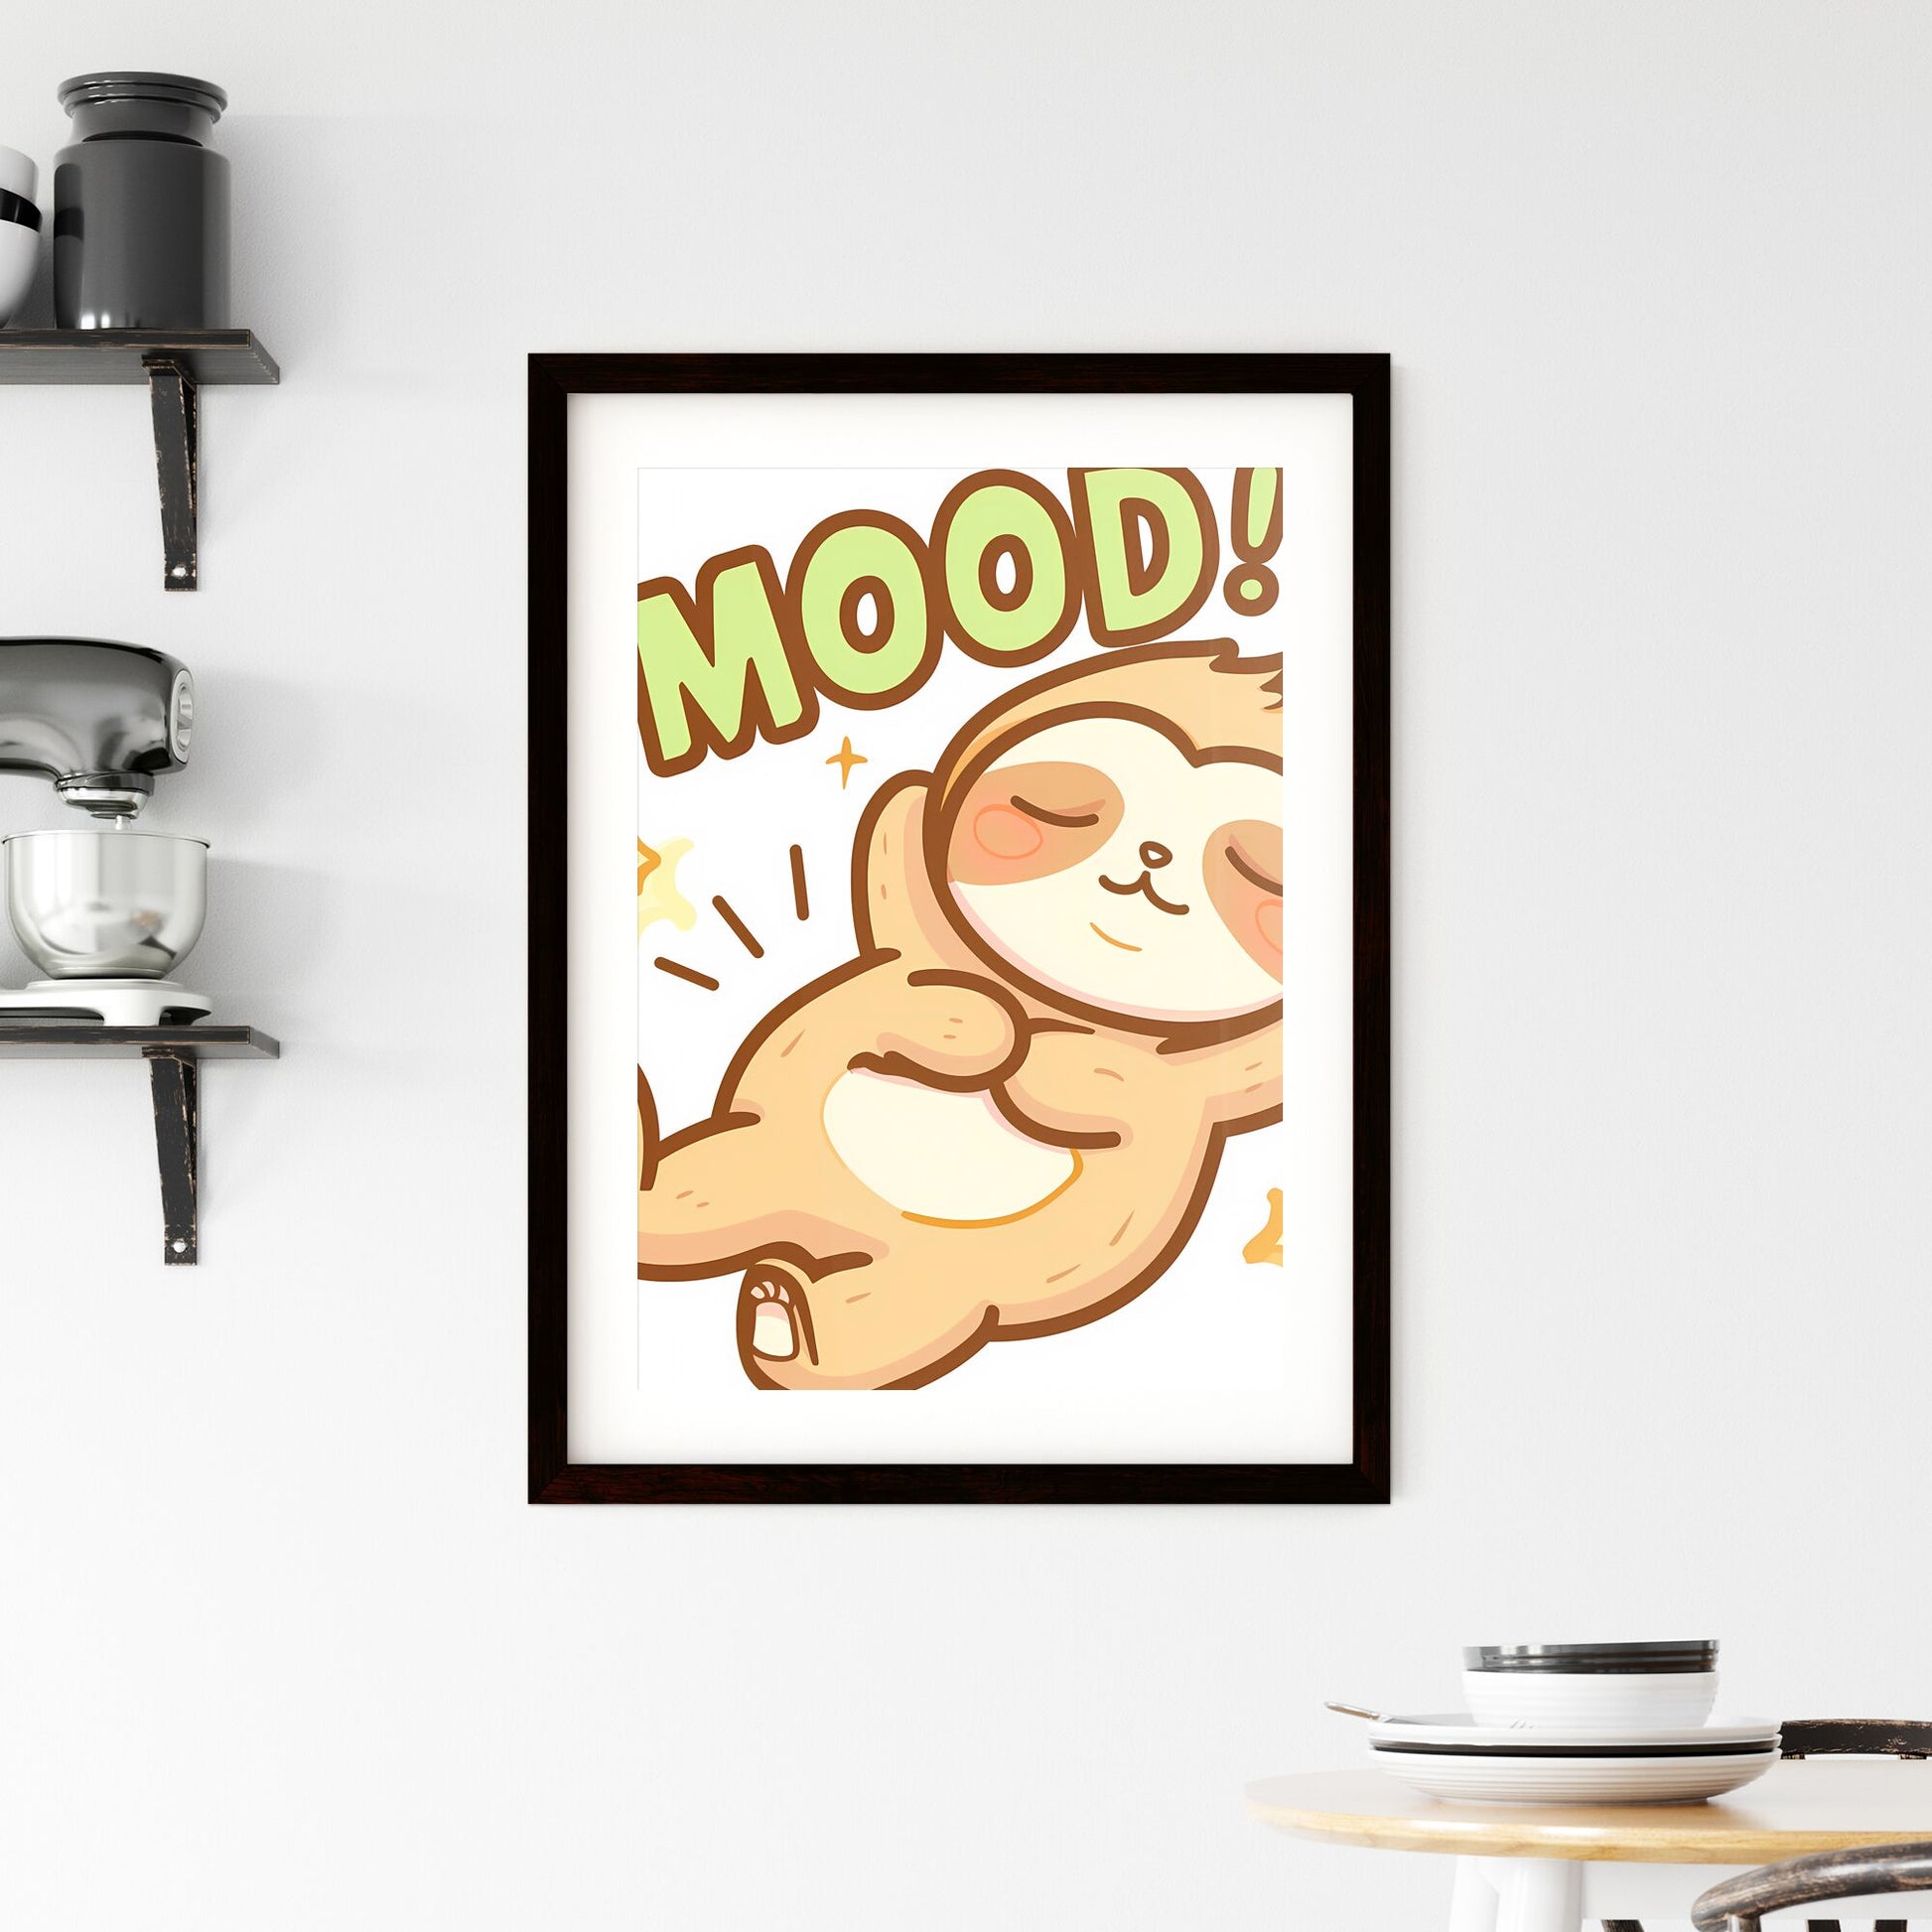 A Poster of Kawaii Sleeping Sloth With Big Letters #Mood Vector Art - A Cartoon Of A Sloth Default Title